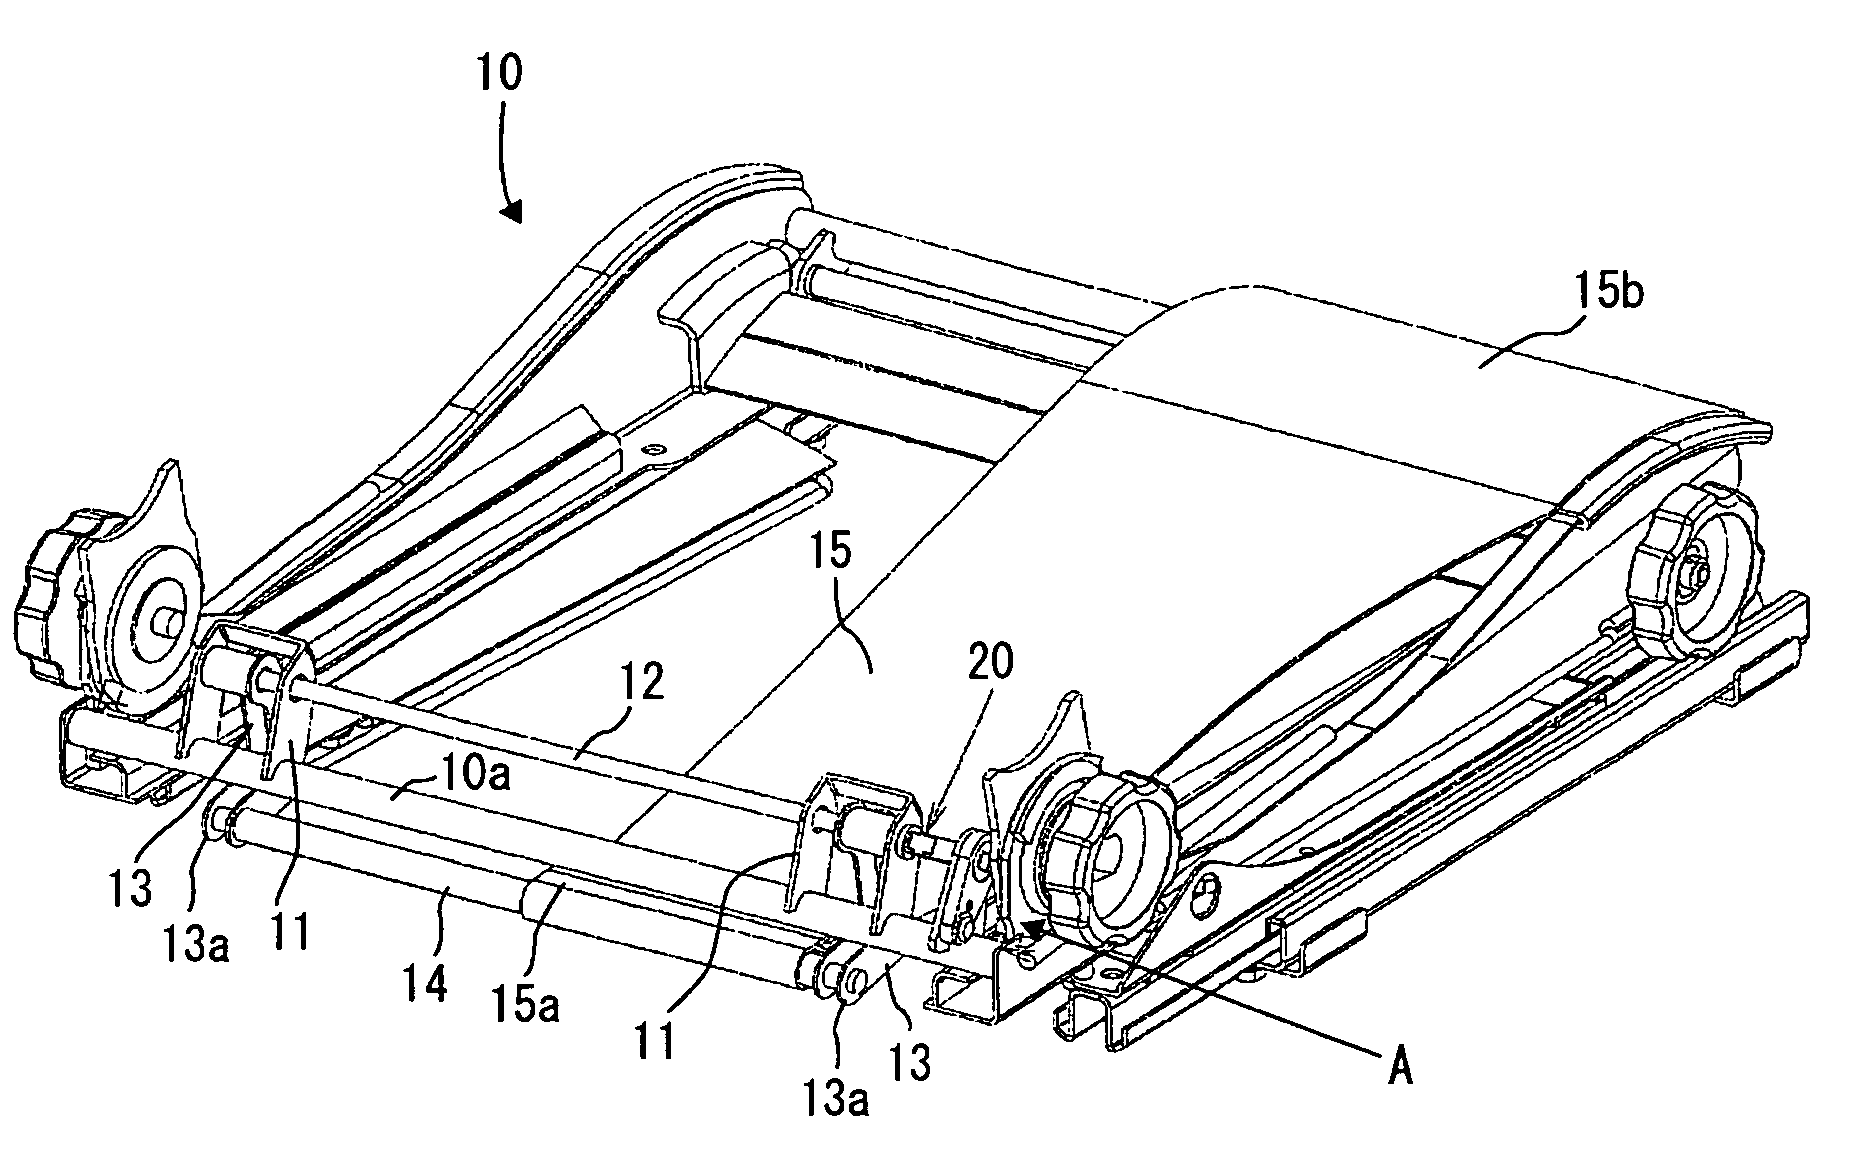 Seat structure and device for determining load on seat